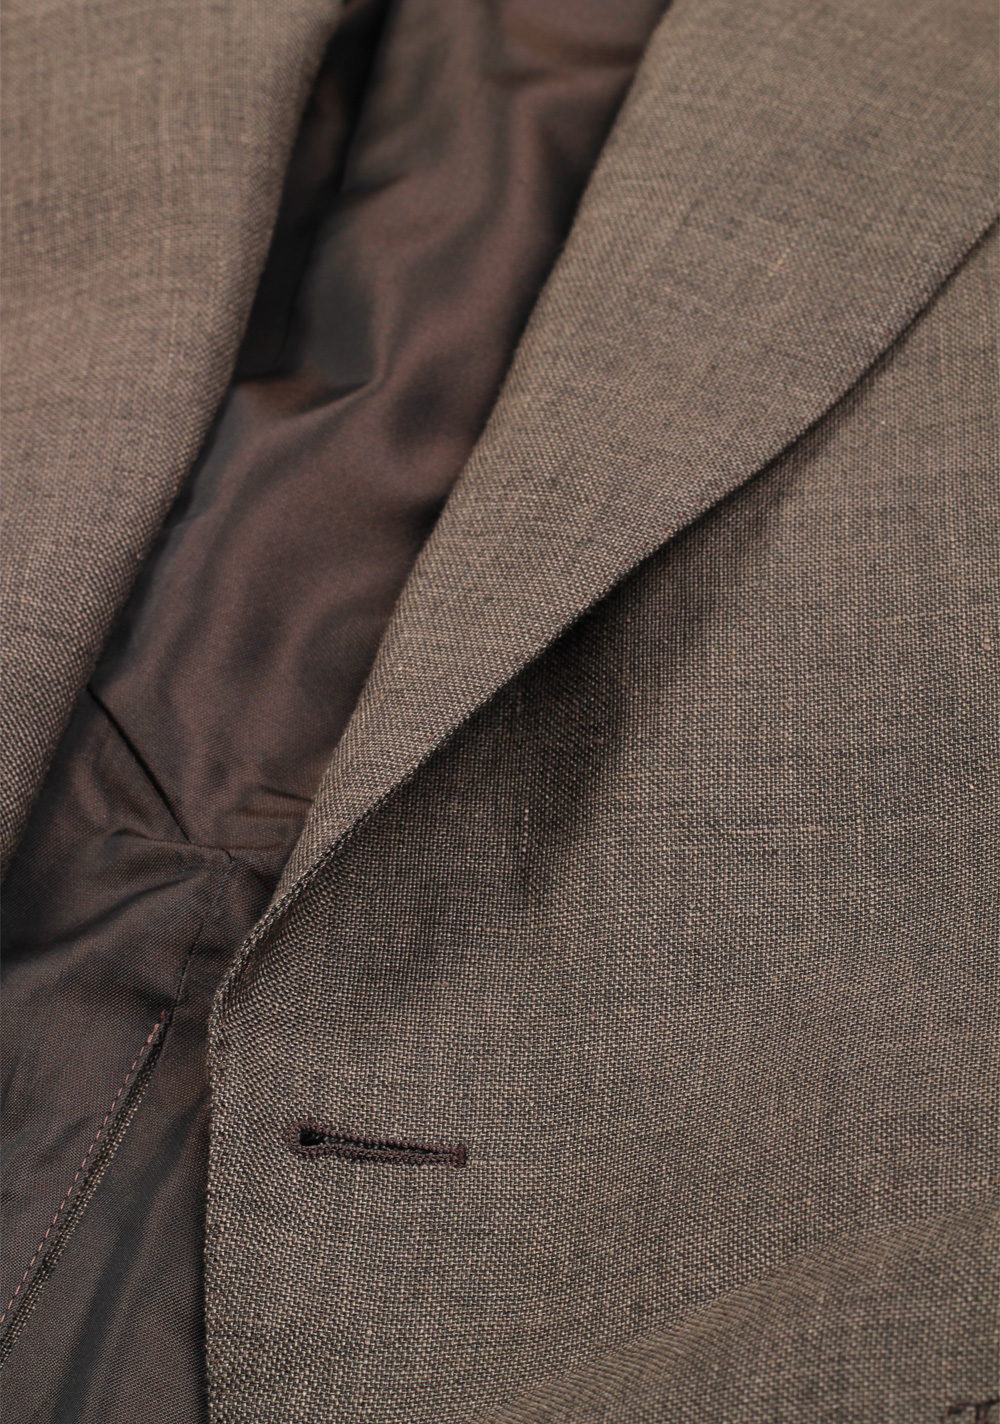 TOM FORD Shelton Brown Suit Size 48 / 38R U.S. In Mohair Wool | Costume Limité